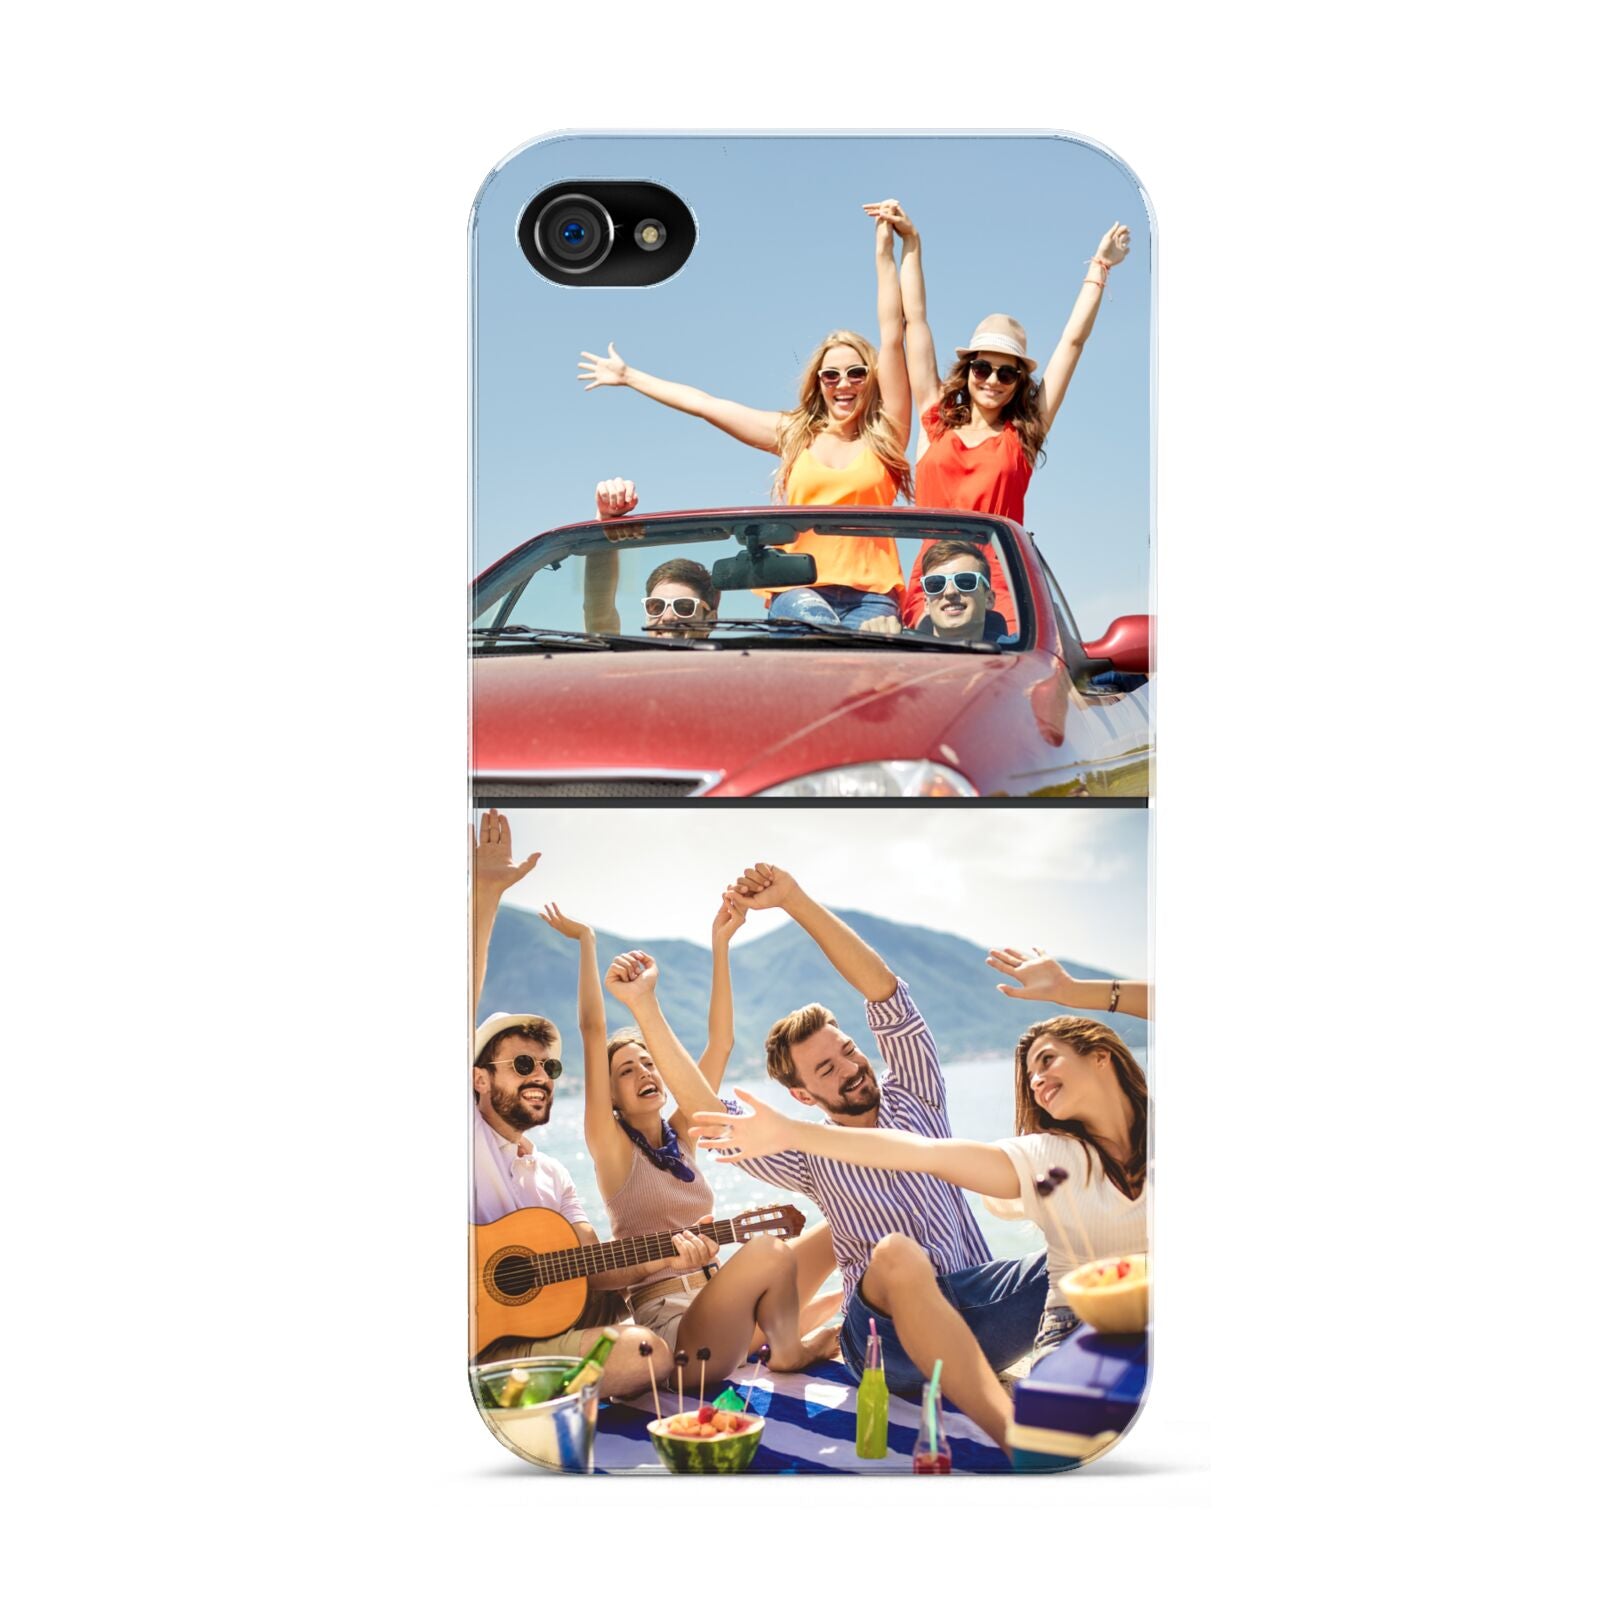 Two Photo Apple iPhone 4s Case